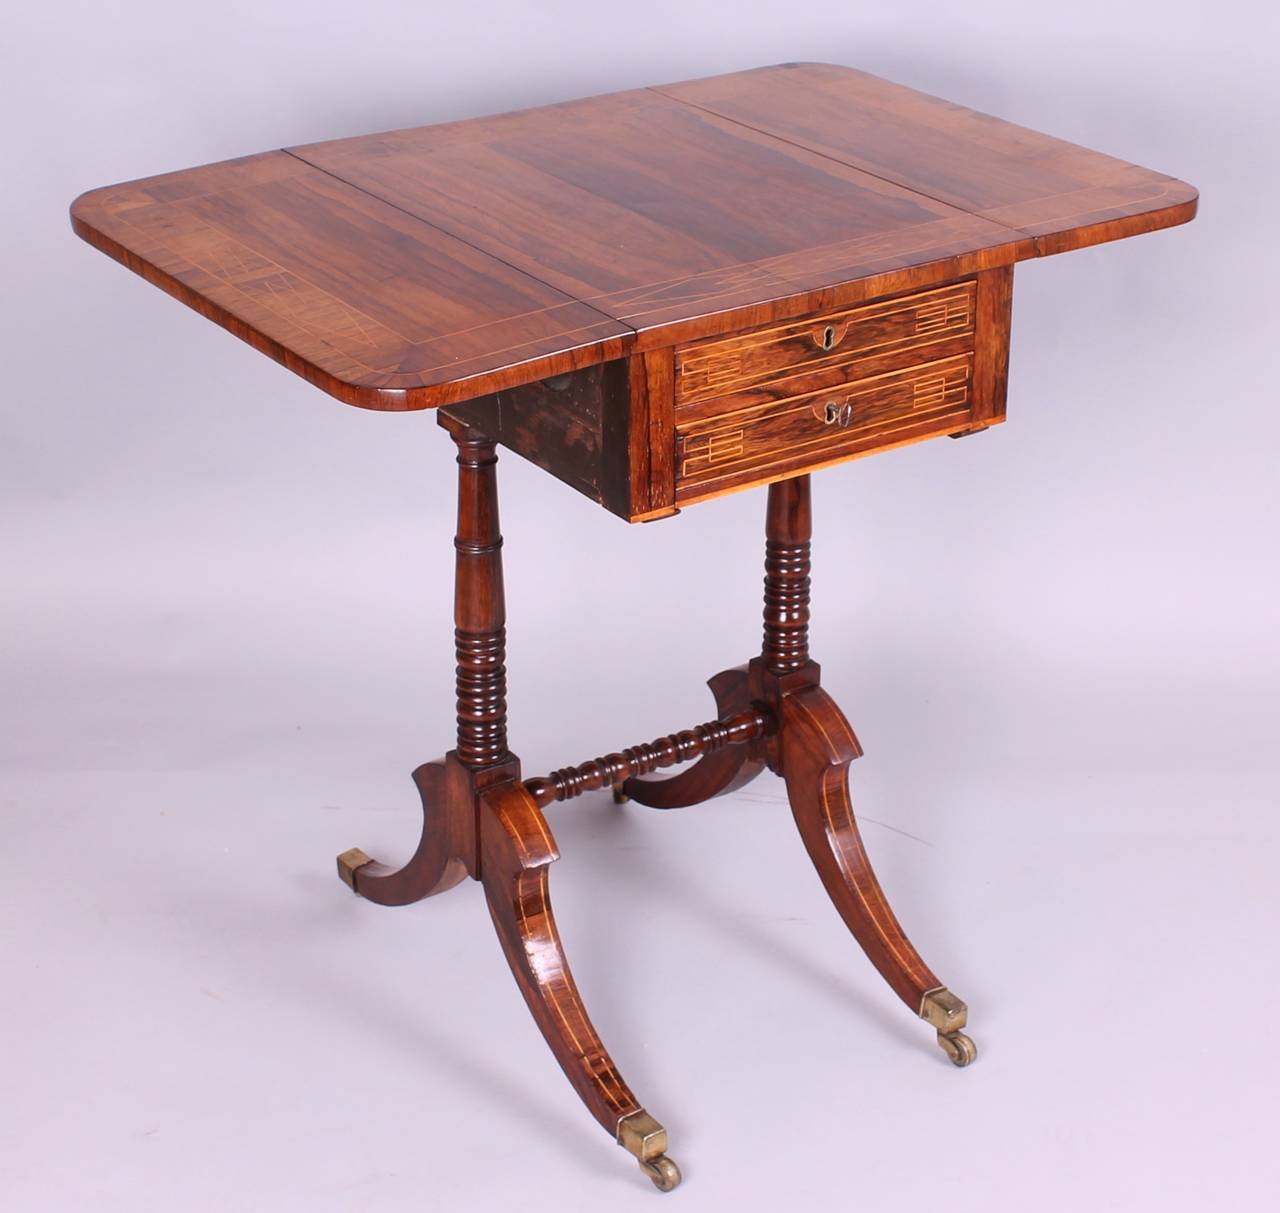 Regency period rosewood work/occasional table; the drop-leaf top with finely figured and coloured veneers, double cross-banded and inlaid with boxwood geometric stringing; fitted with two shallow drawers, and corresponding dummies, on turned